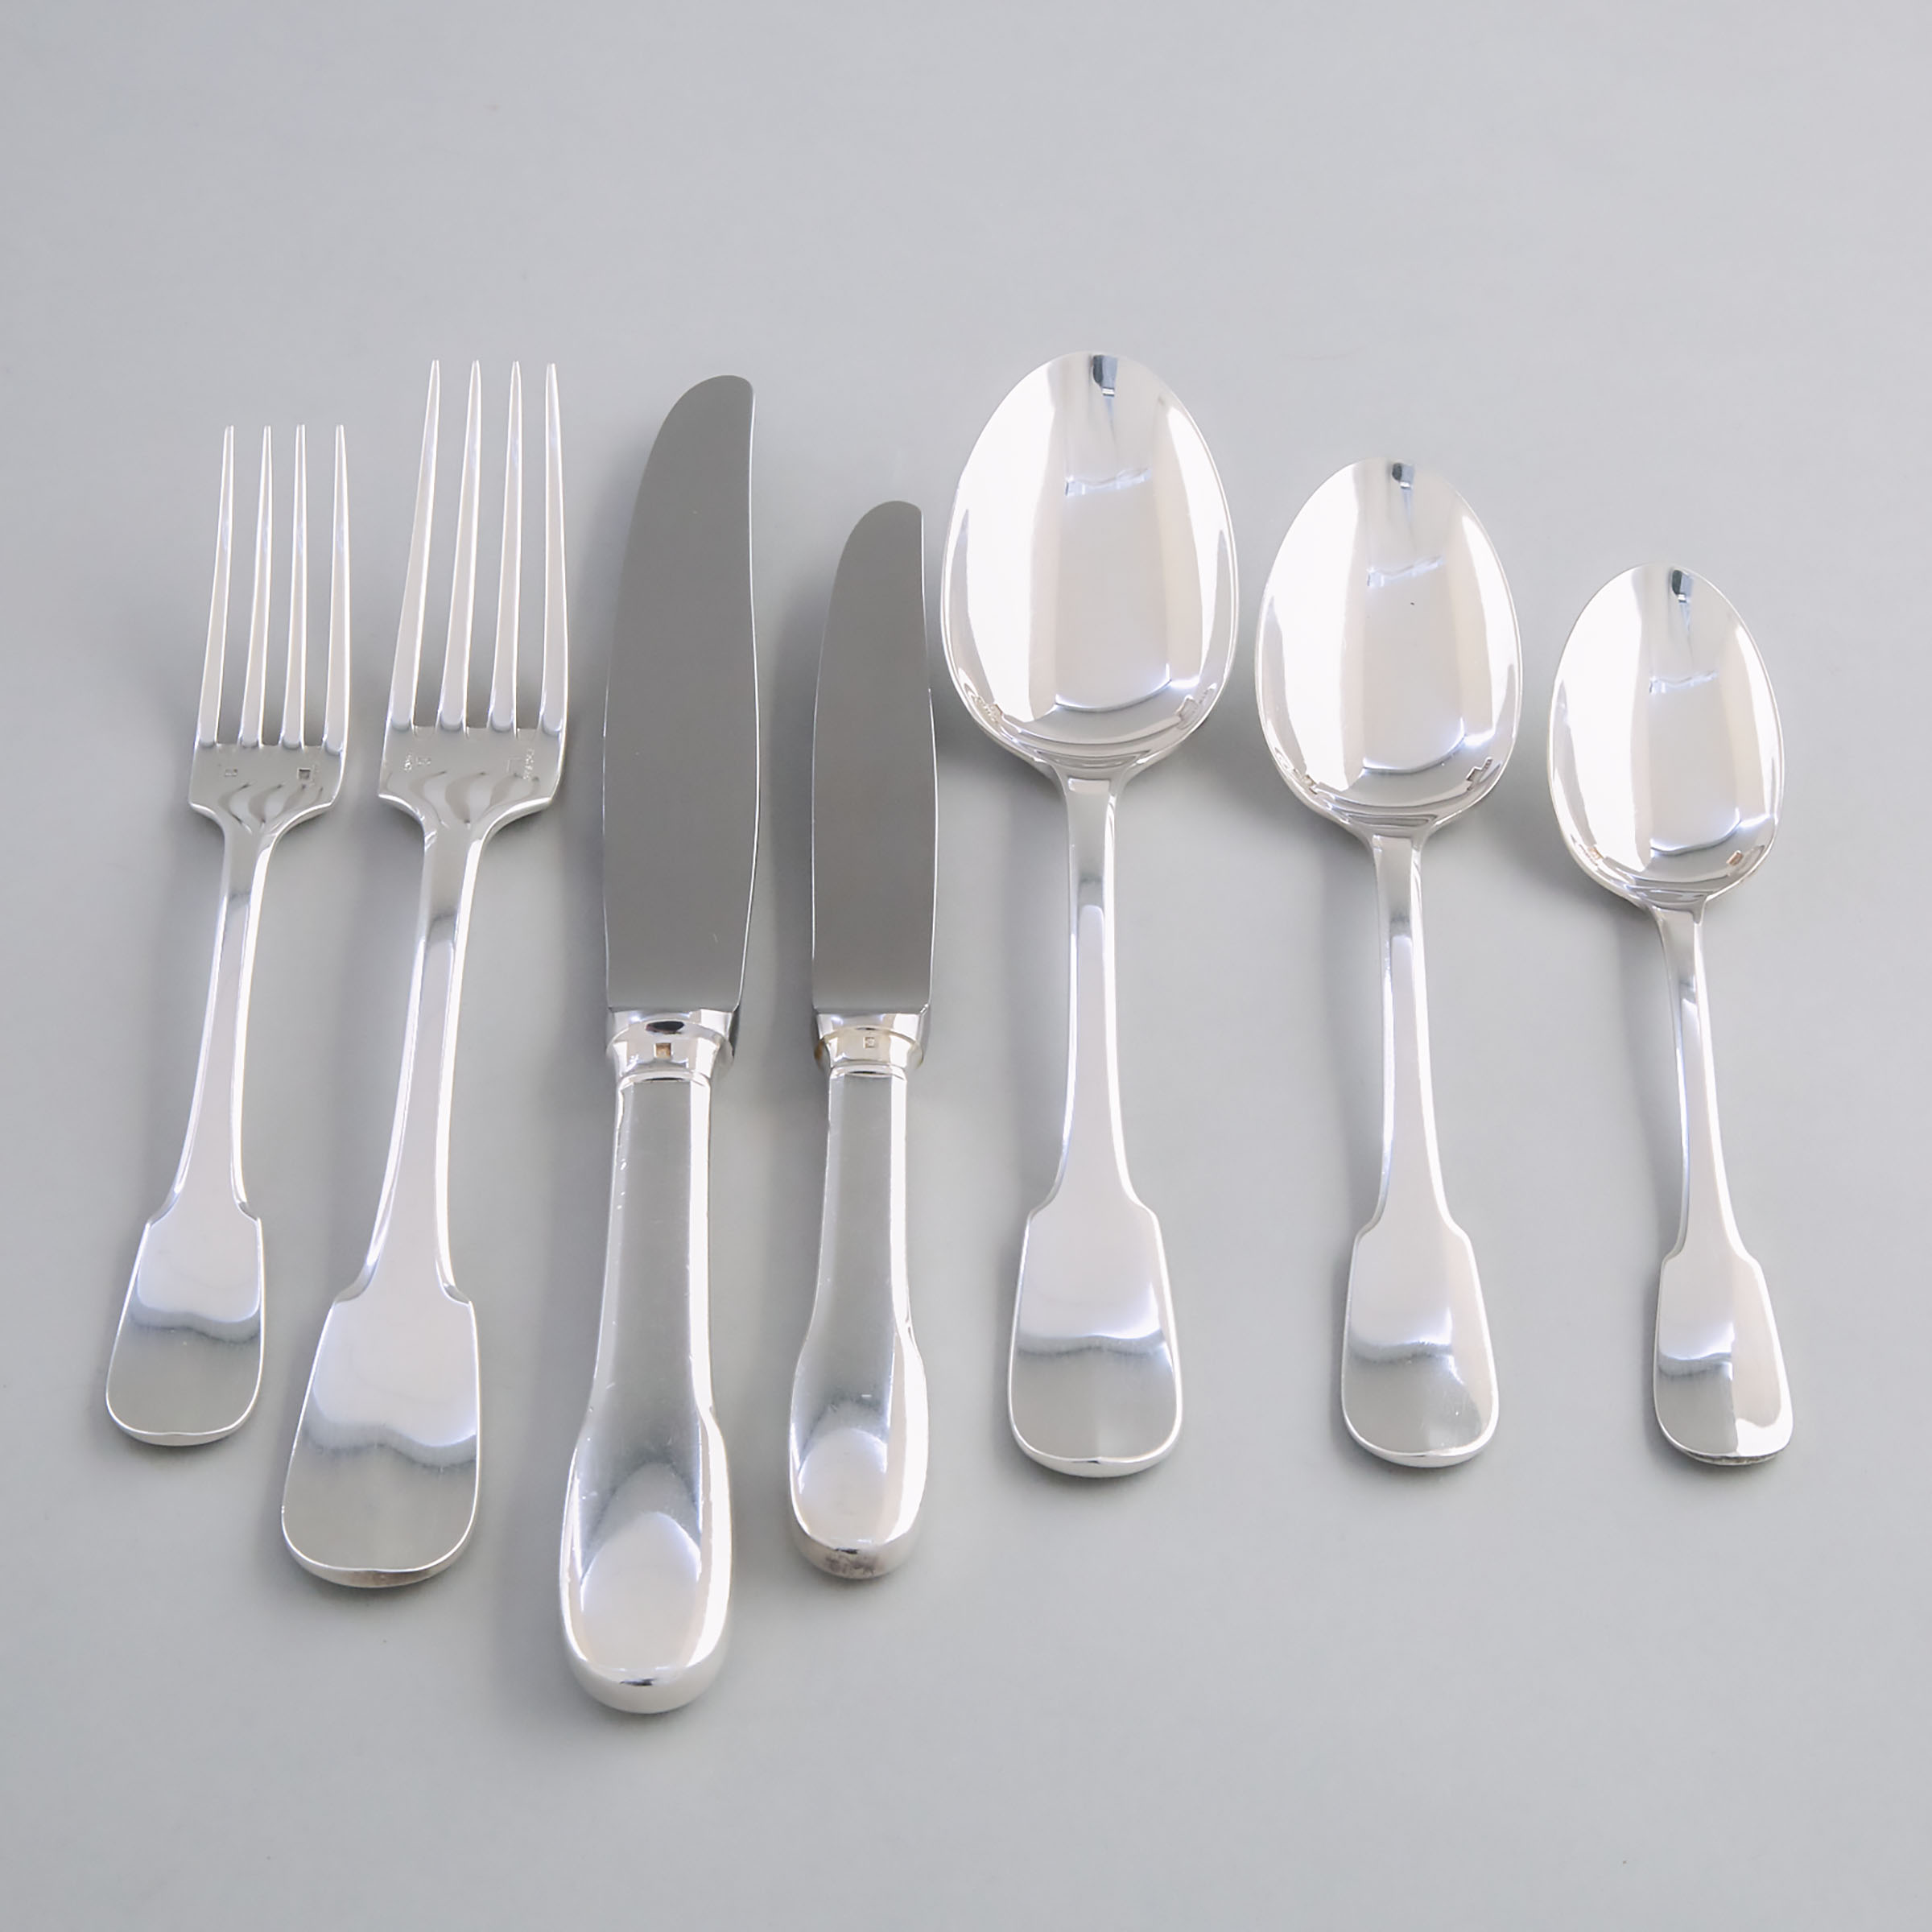 French Silver Plated ‘Cluny’ Pattern Flatware Service, Christofle, 20th century